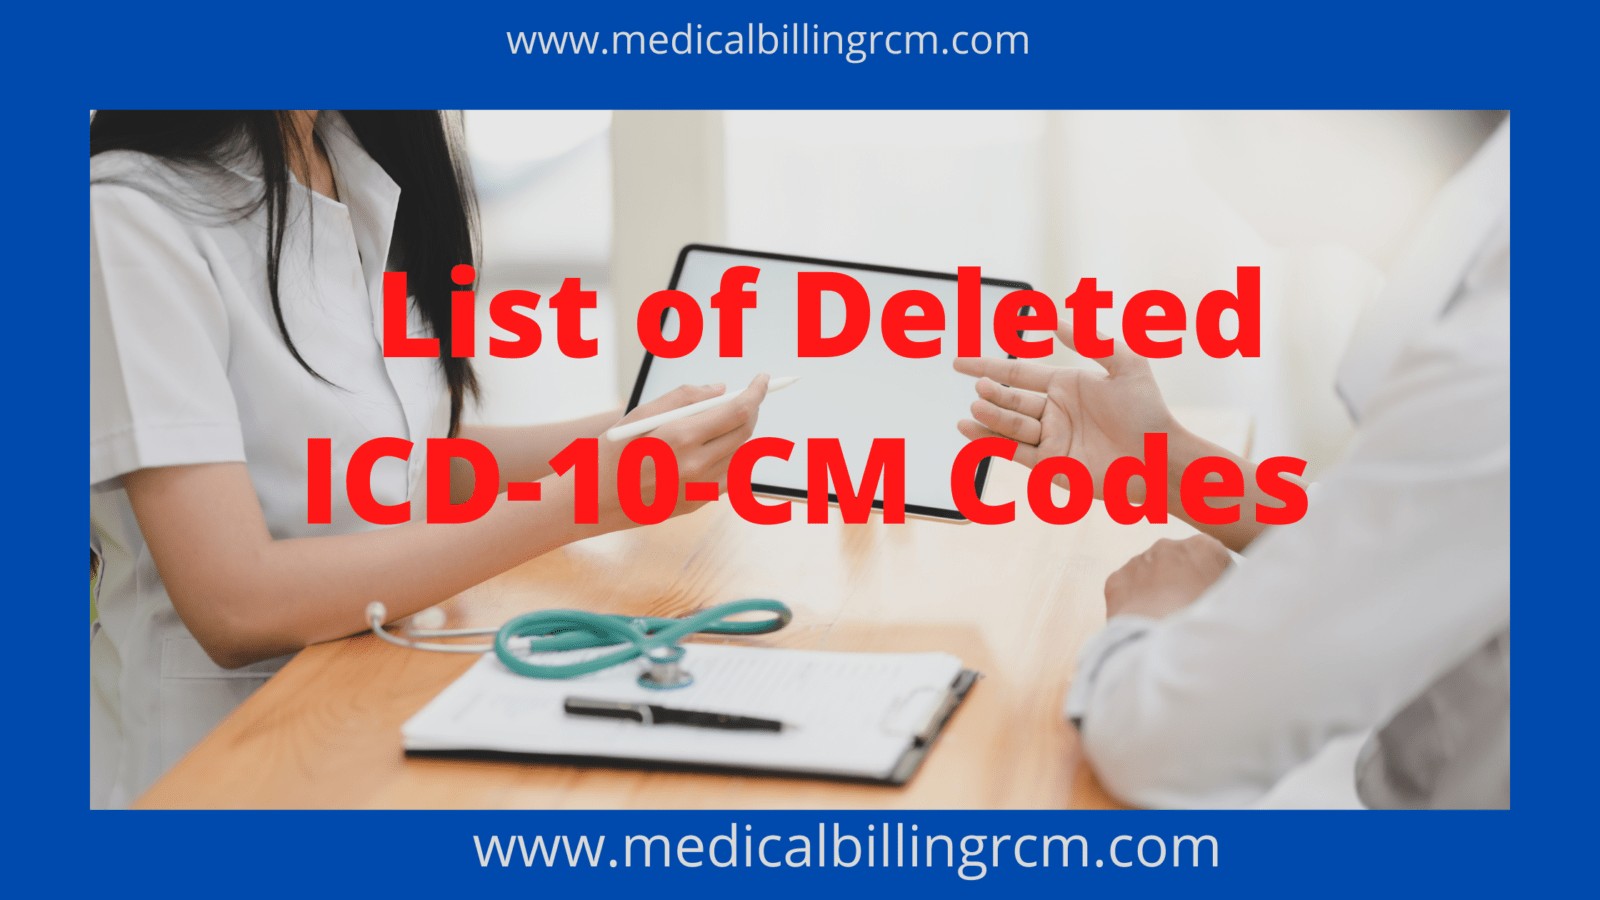 list of deleted icd-10 codes